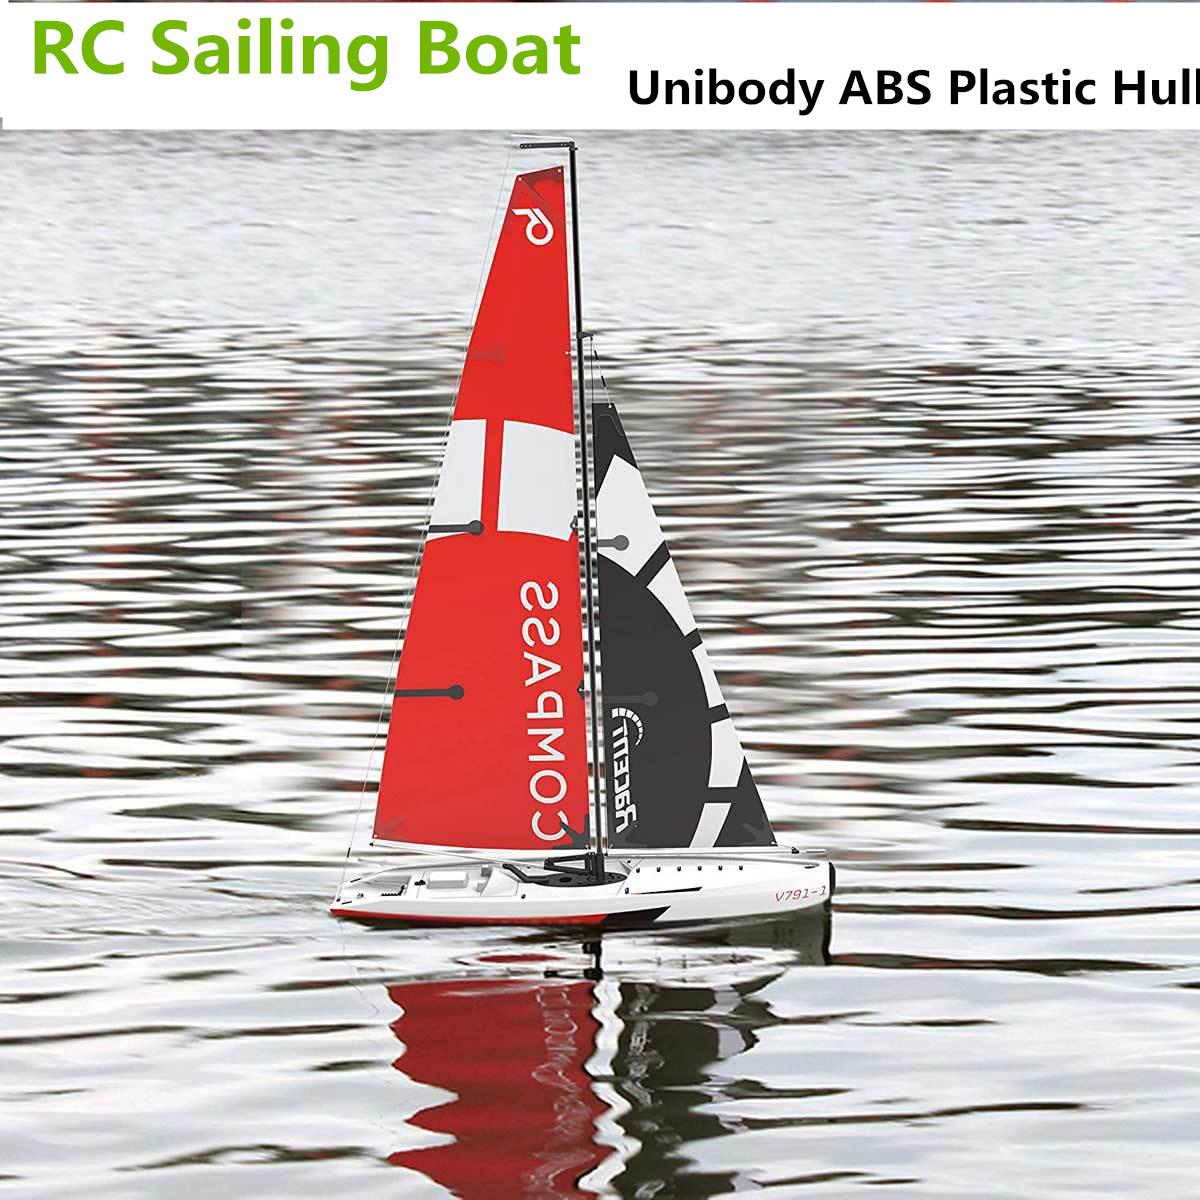 Remote Control Sailboat For Adults: Sizes, Designs, and Materials for Remote Control Sailboats